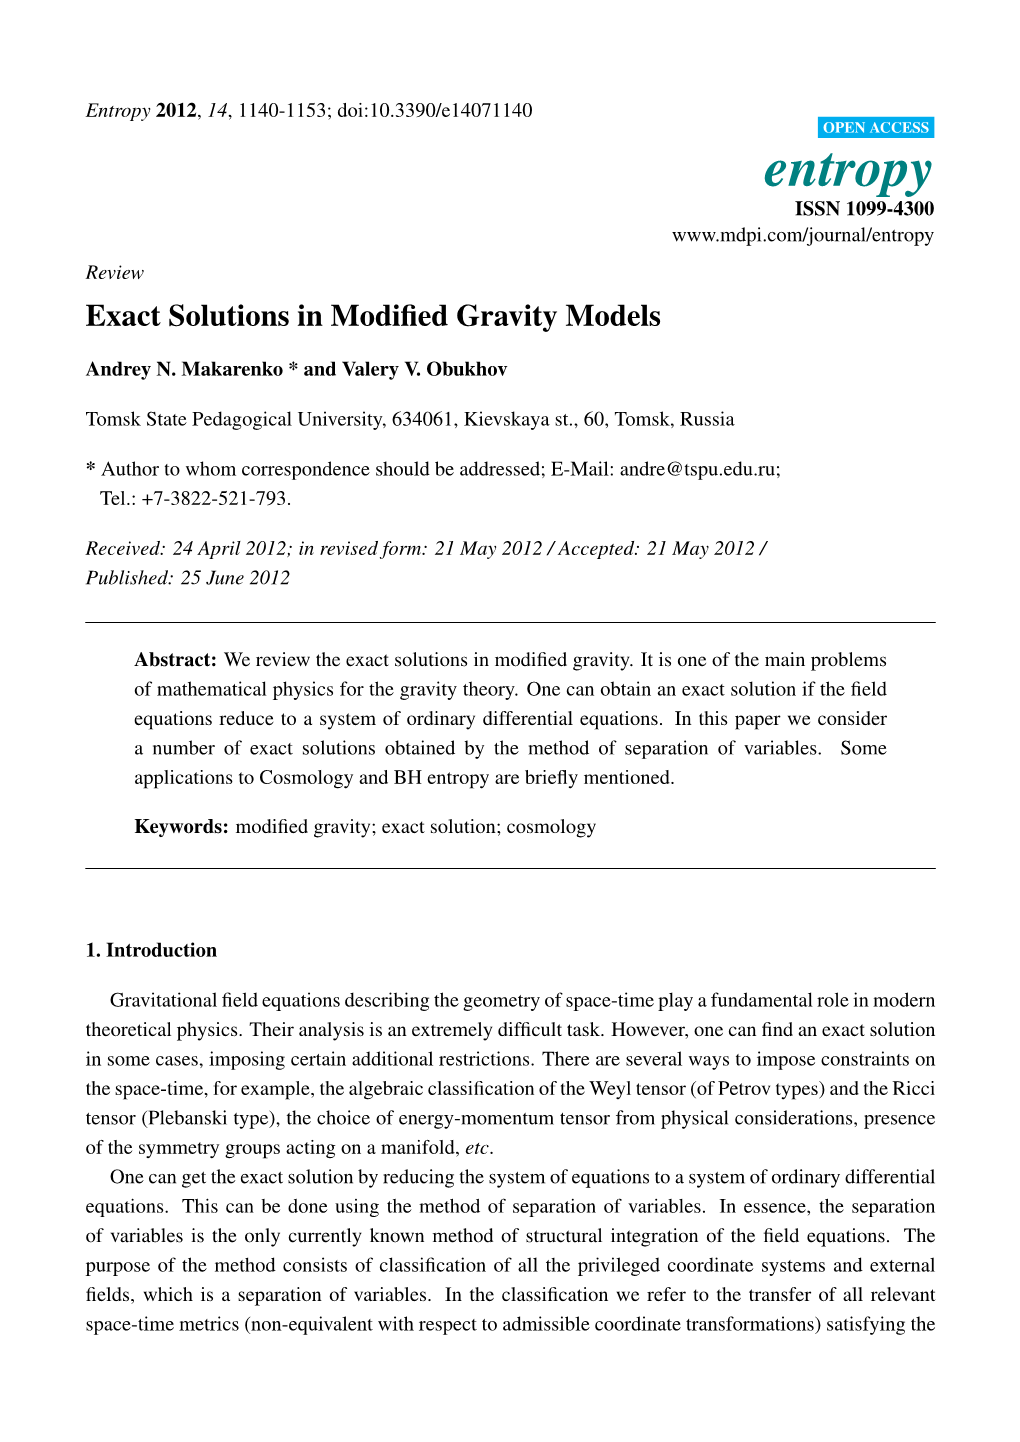 Exact Solutions in Modified Gravity Models